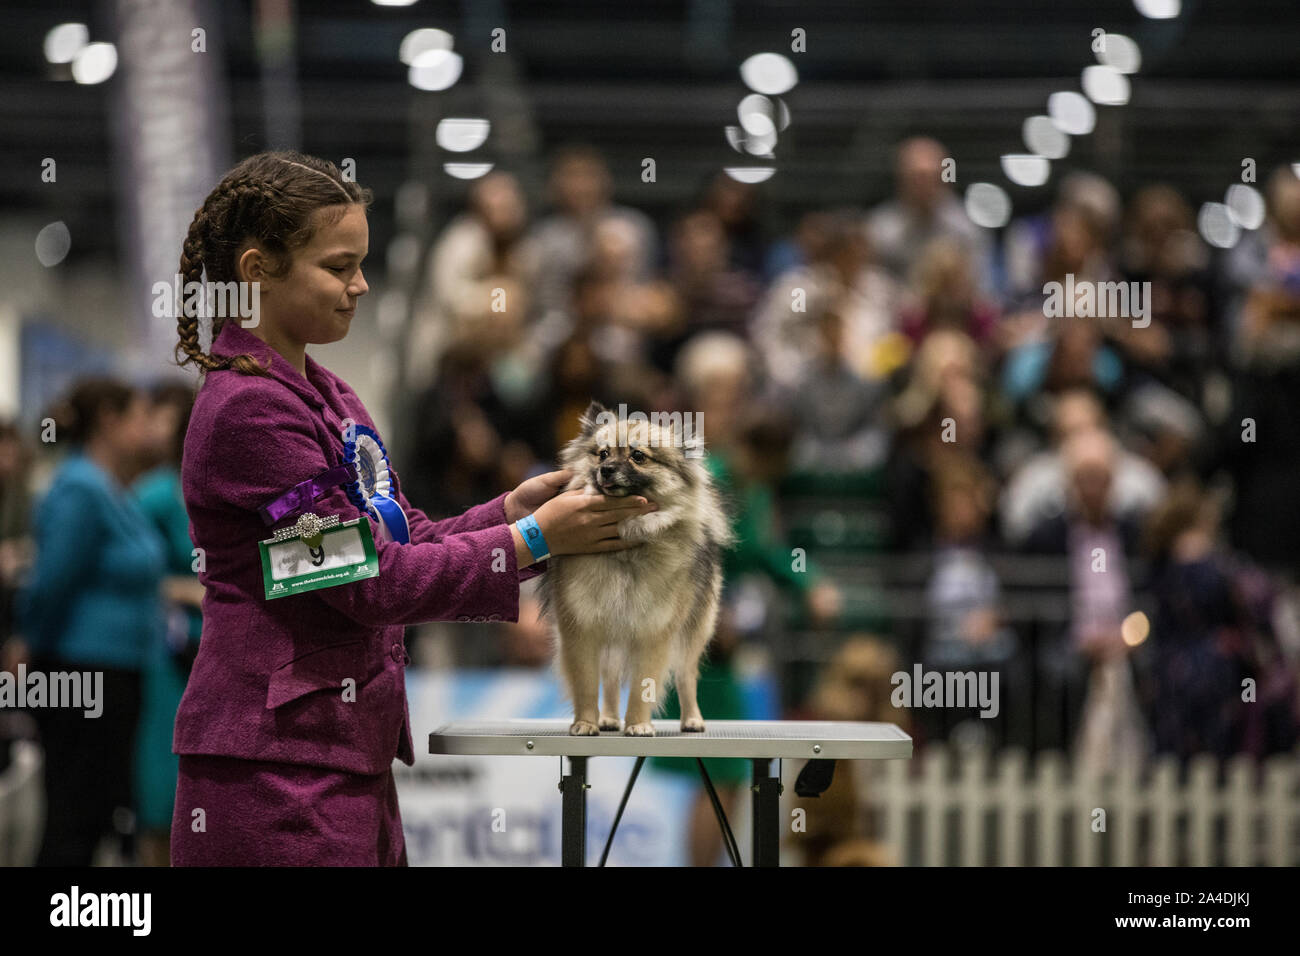 The Kennel Club Discovery Dogs exhibition at Excel London, UK Picture shows the final judging of the UK Junior Handler of the Year 2019. Stock Photo